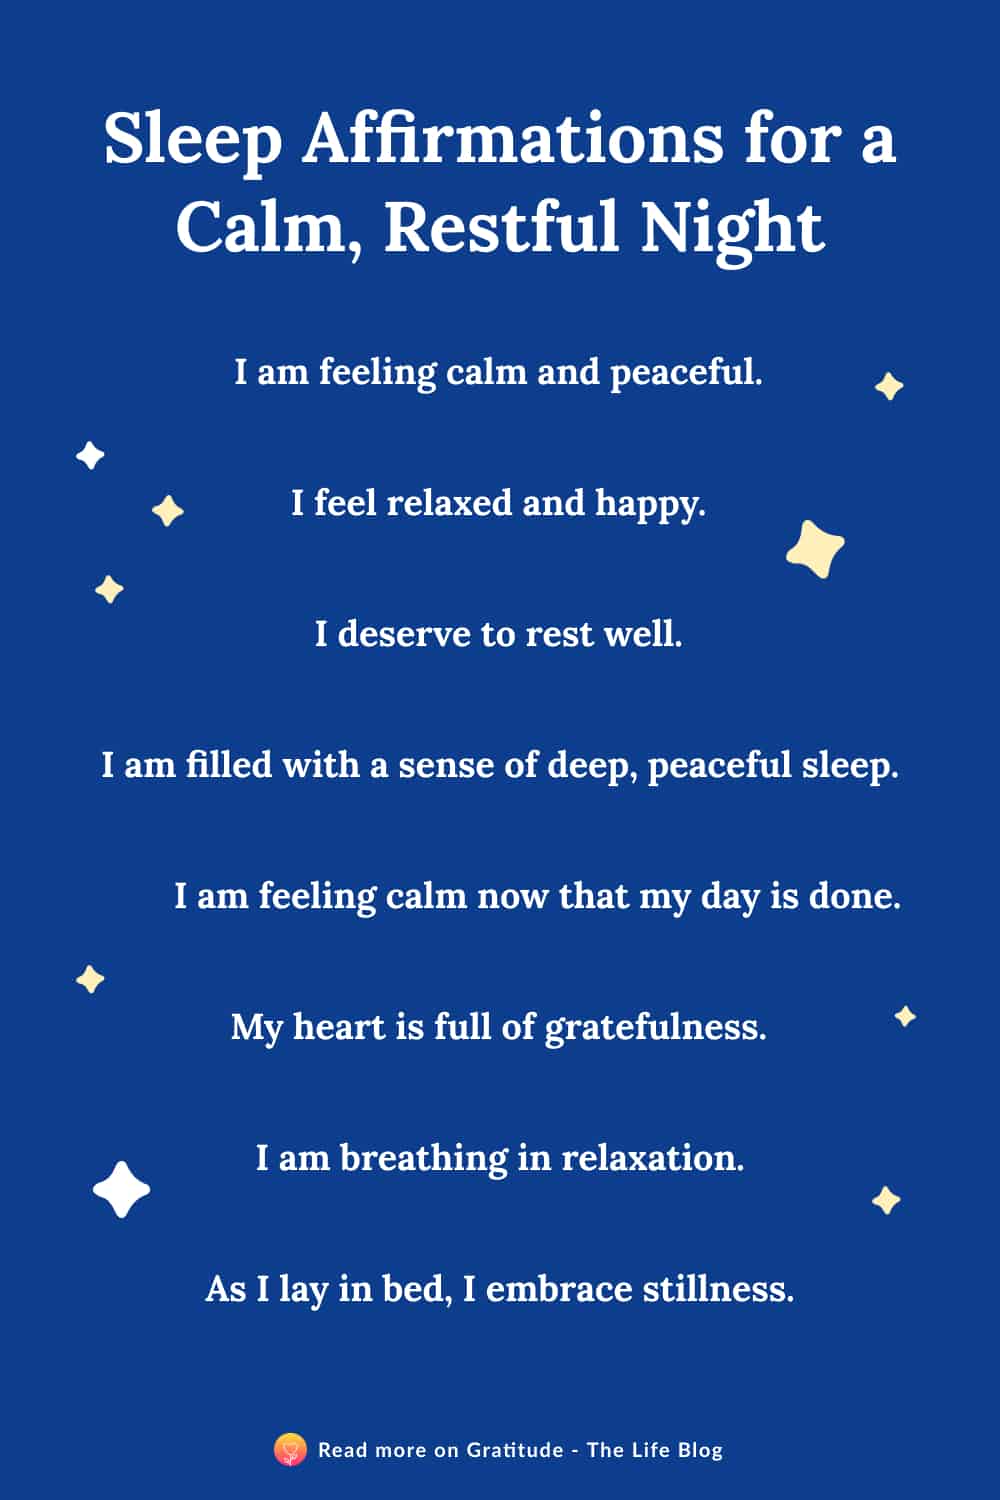 Image with list of sleep affirmations